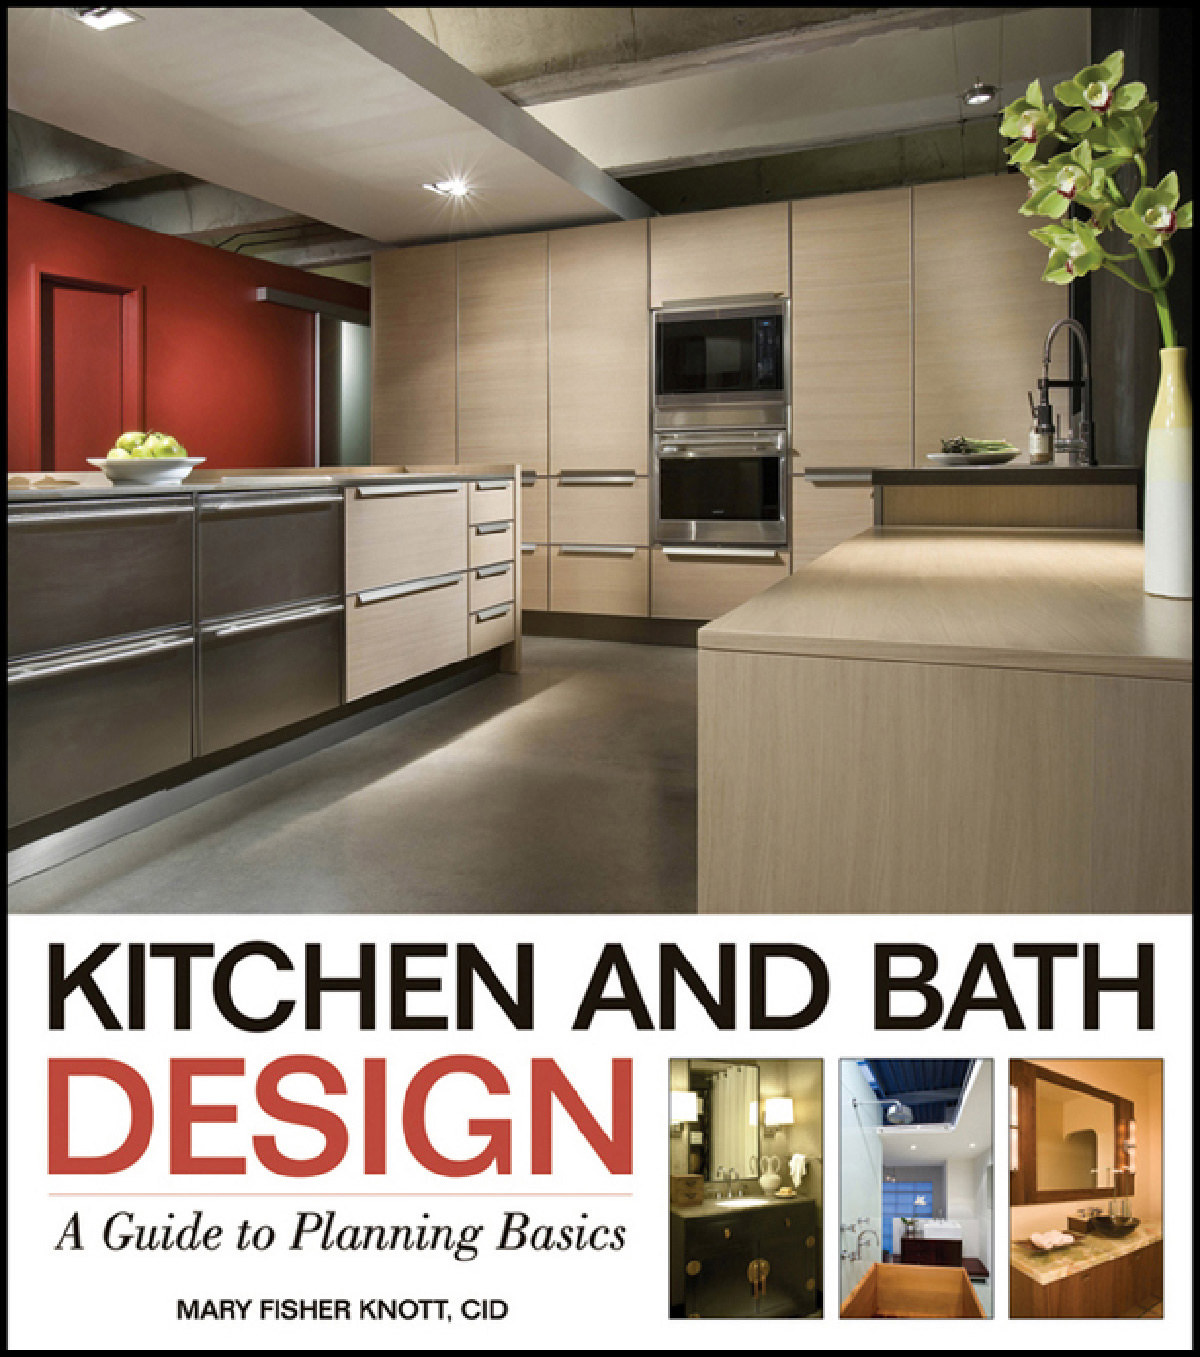 0470392002 Kitchen And Bath Design A Guide To Planning Basics